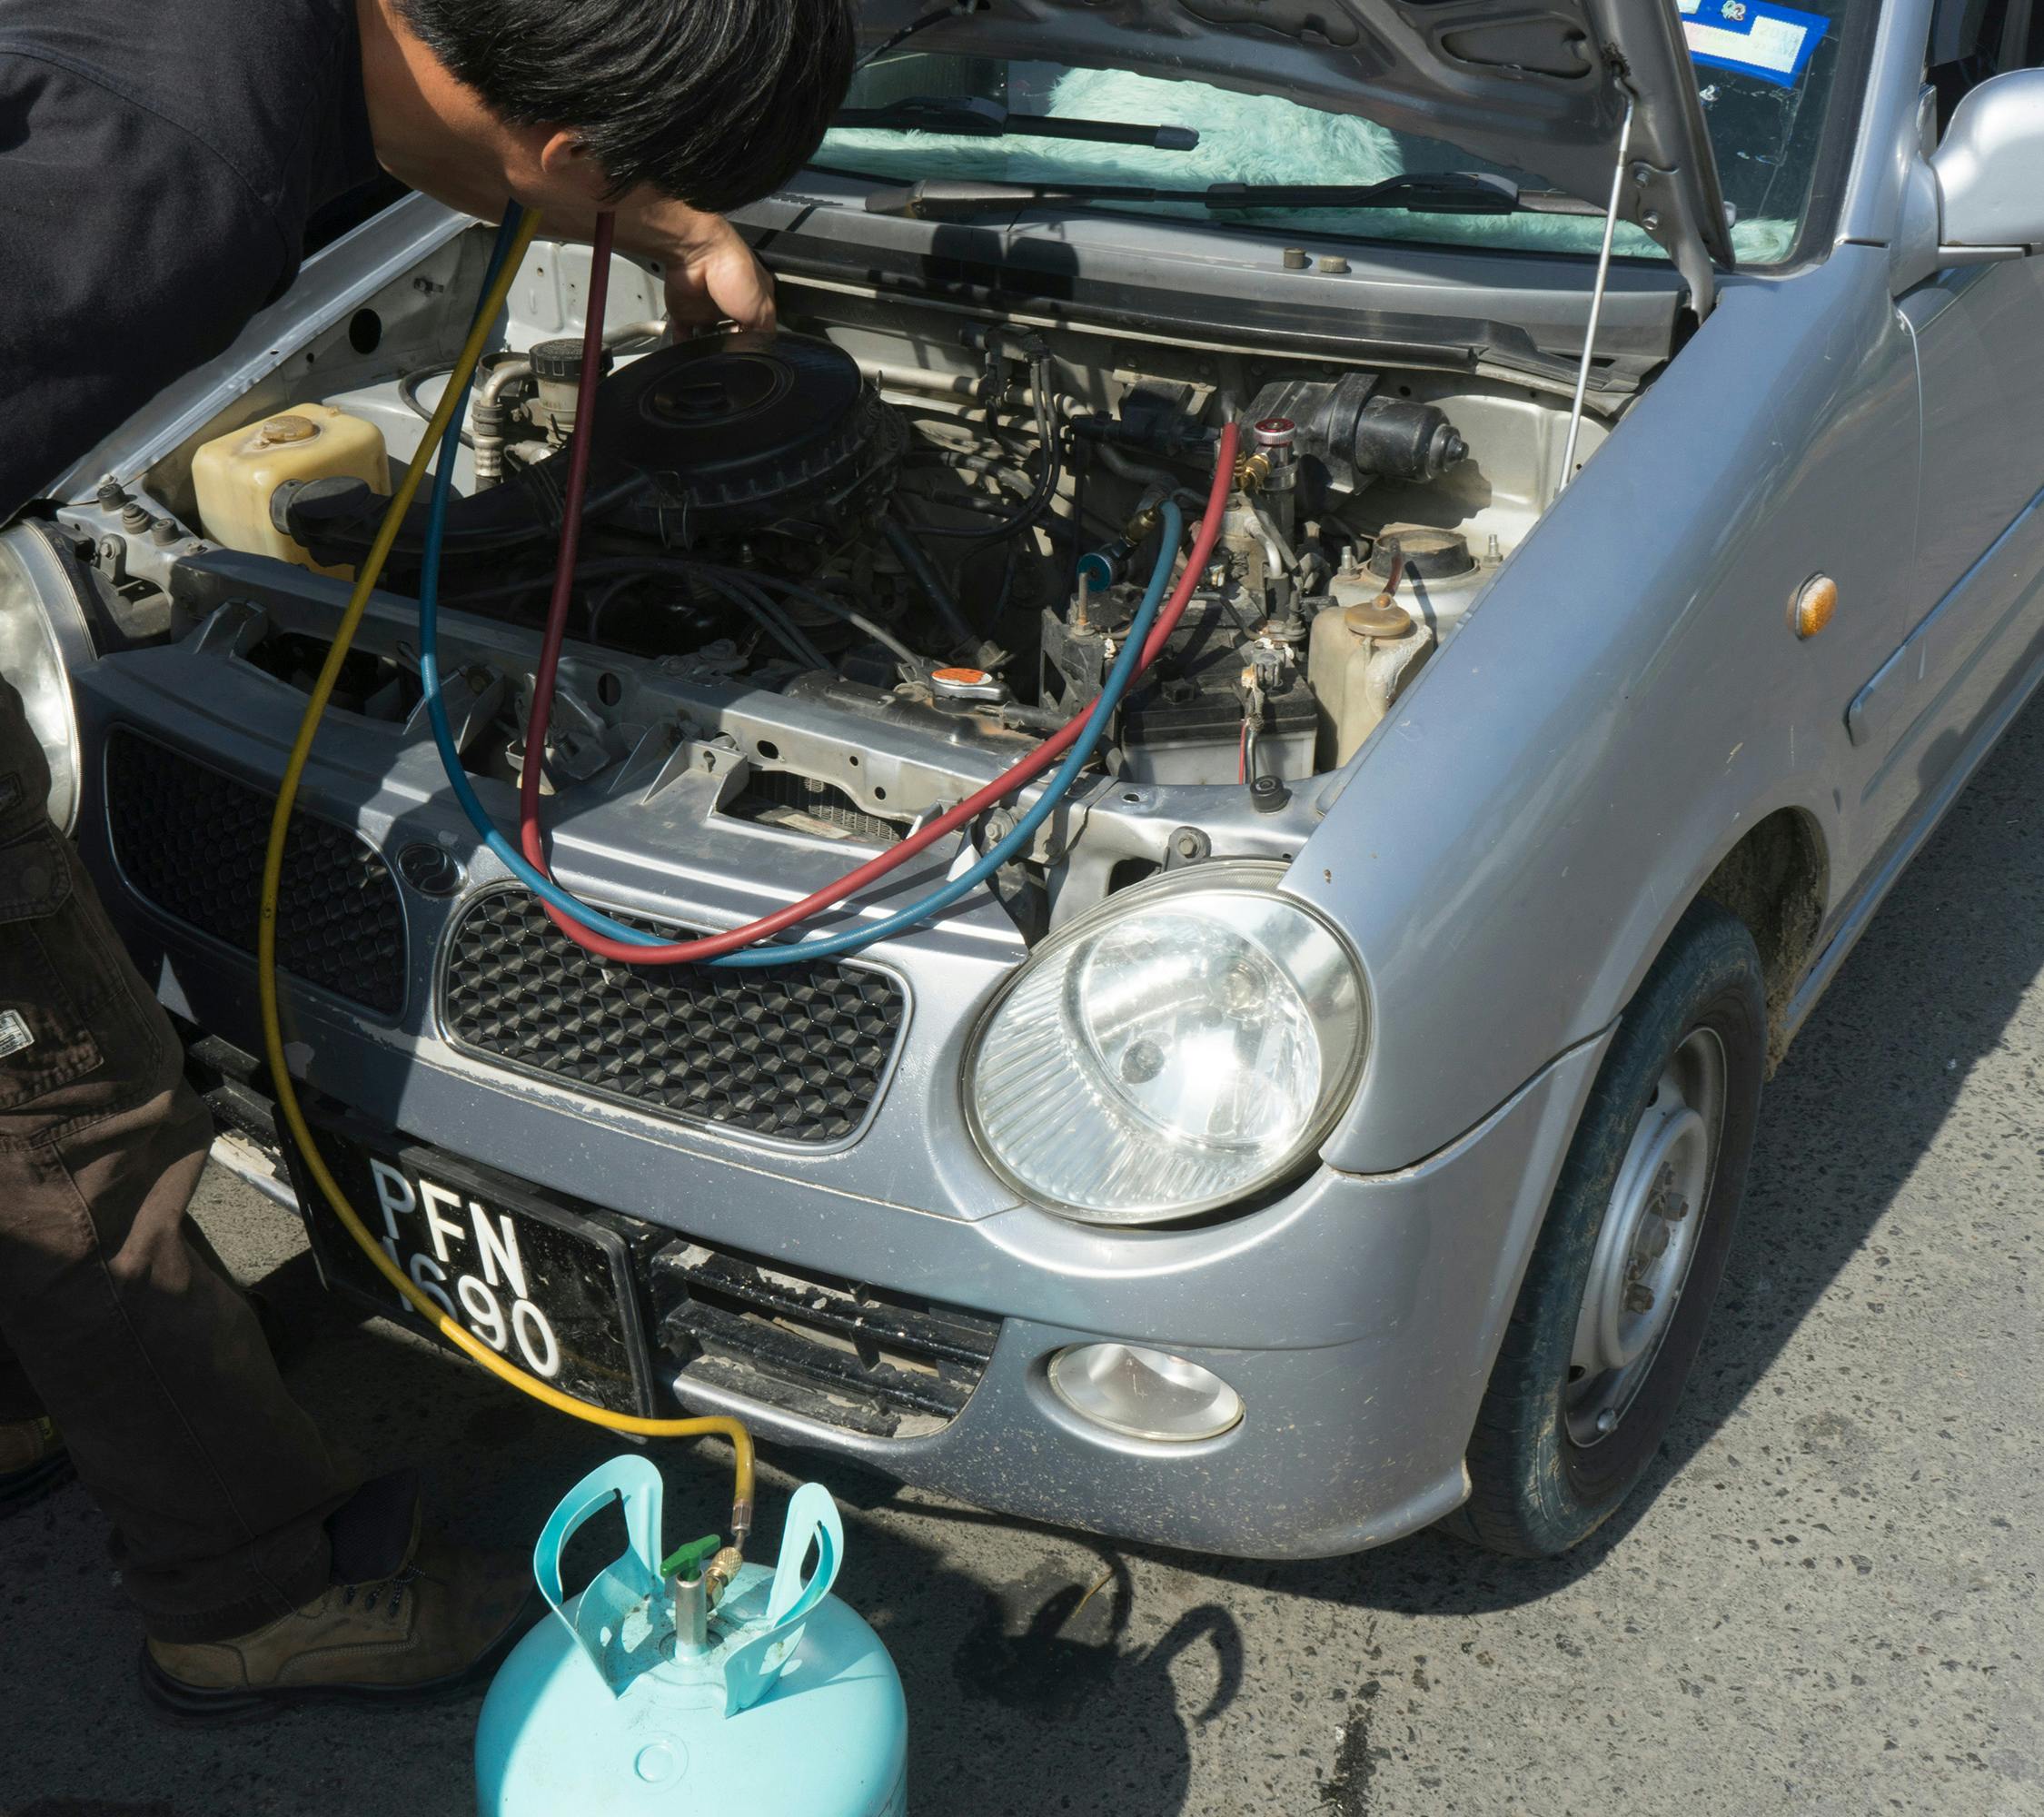 A mechanic carrying out an air conditioning regas on a car